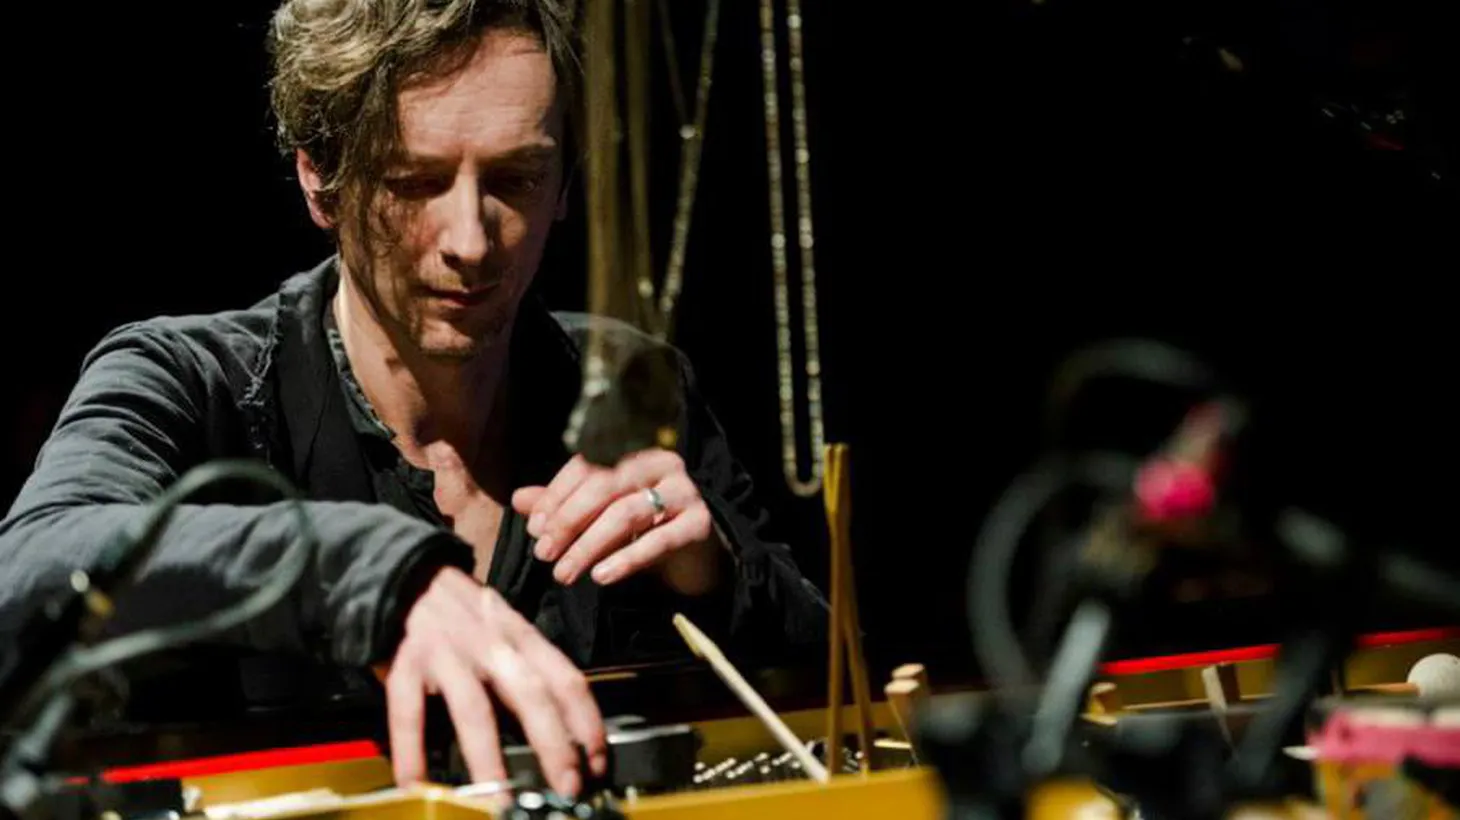 Hauschka is an experimental pianist based in Dusseldorf who integrates an assortment of toys into his piano playing.